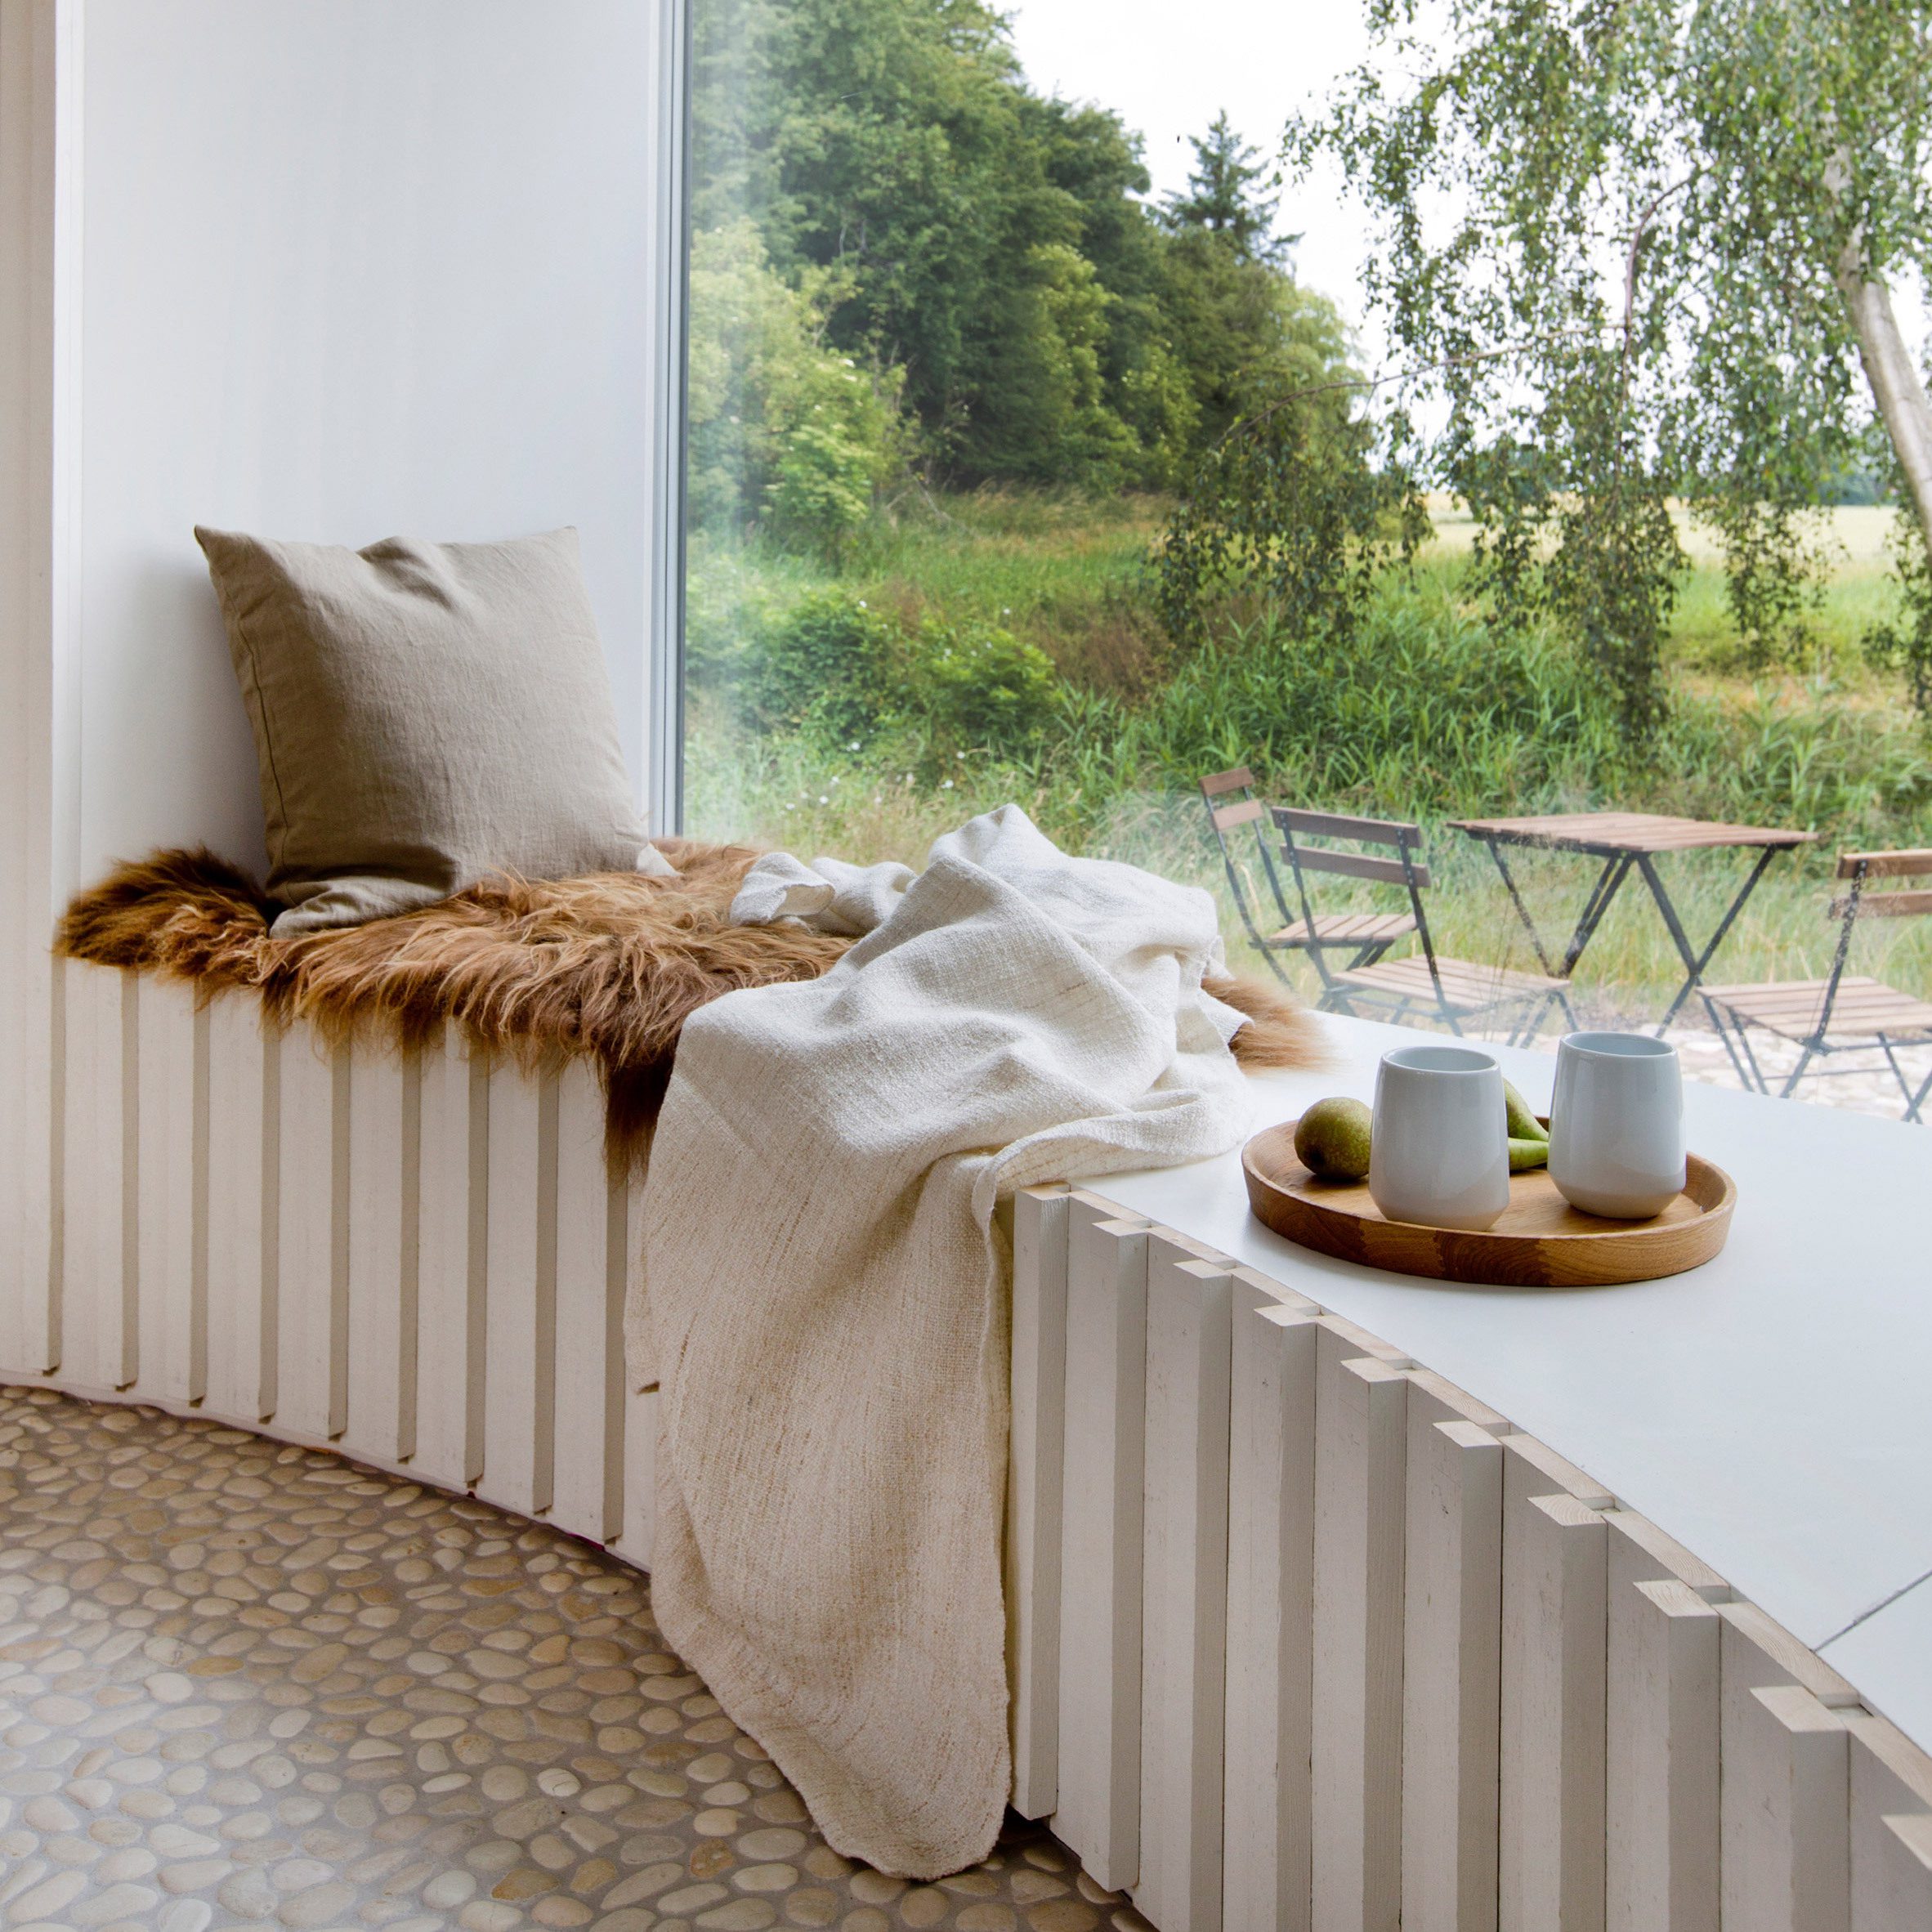 Amazing window seat/bed. The - Architecture & Design